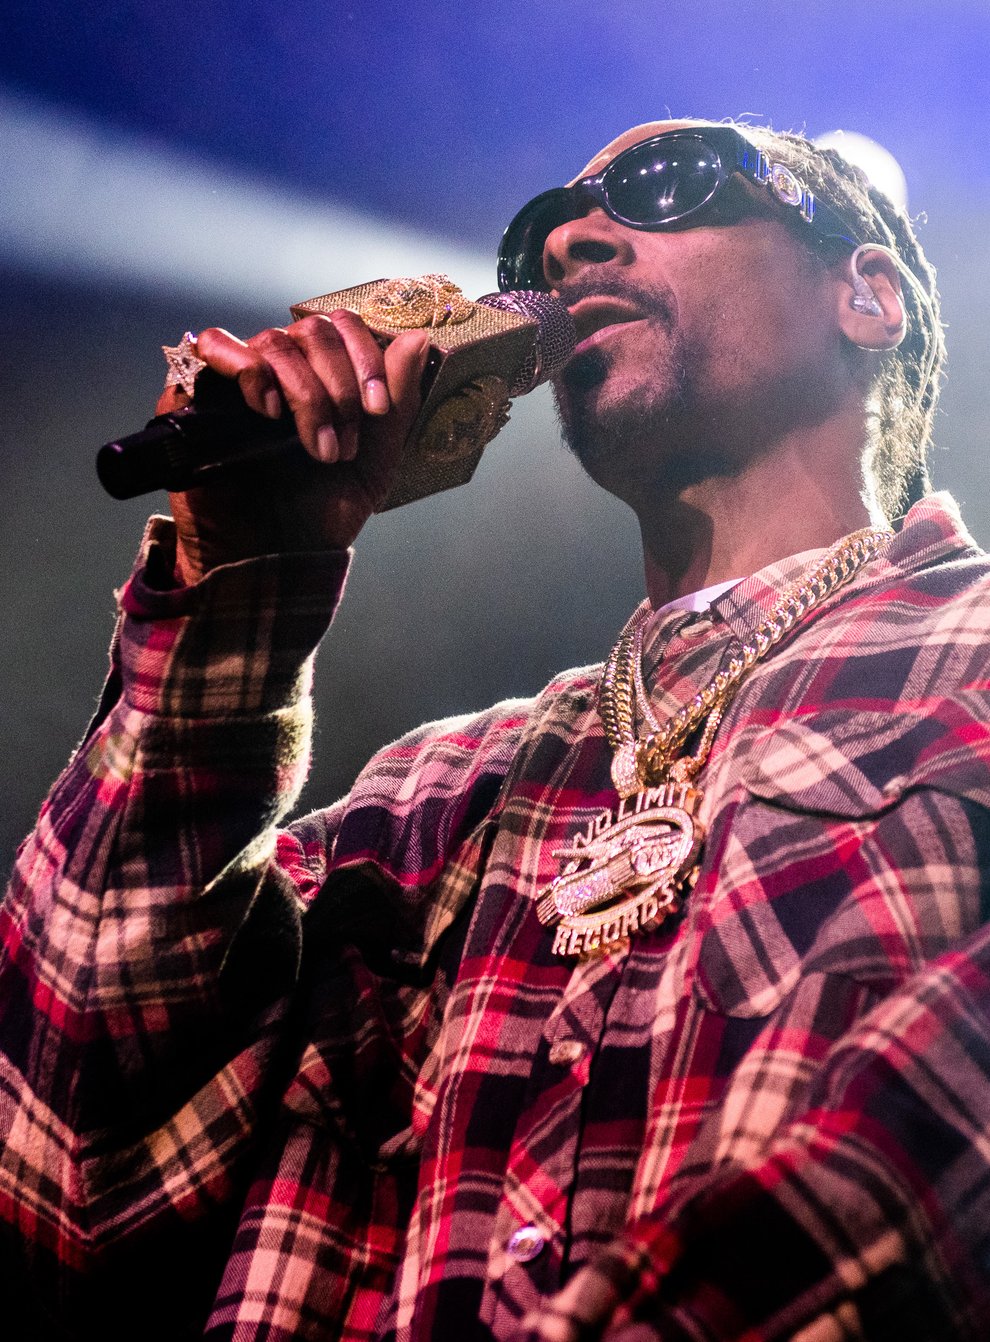 Snoop listed all the groups he recalls Trump insulting during his time in politics